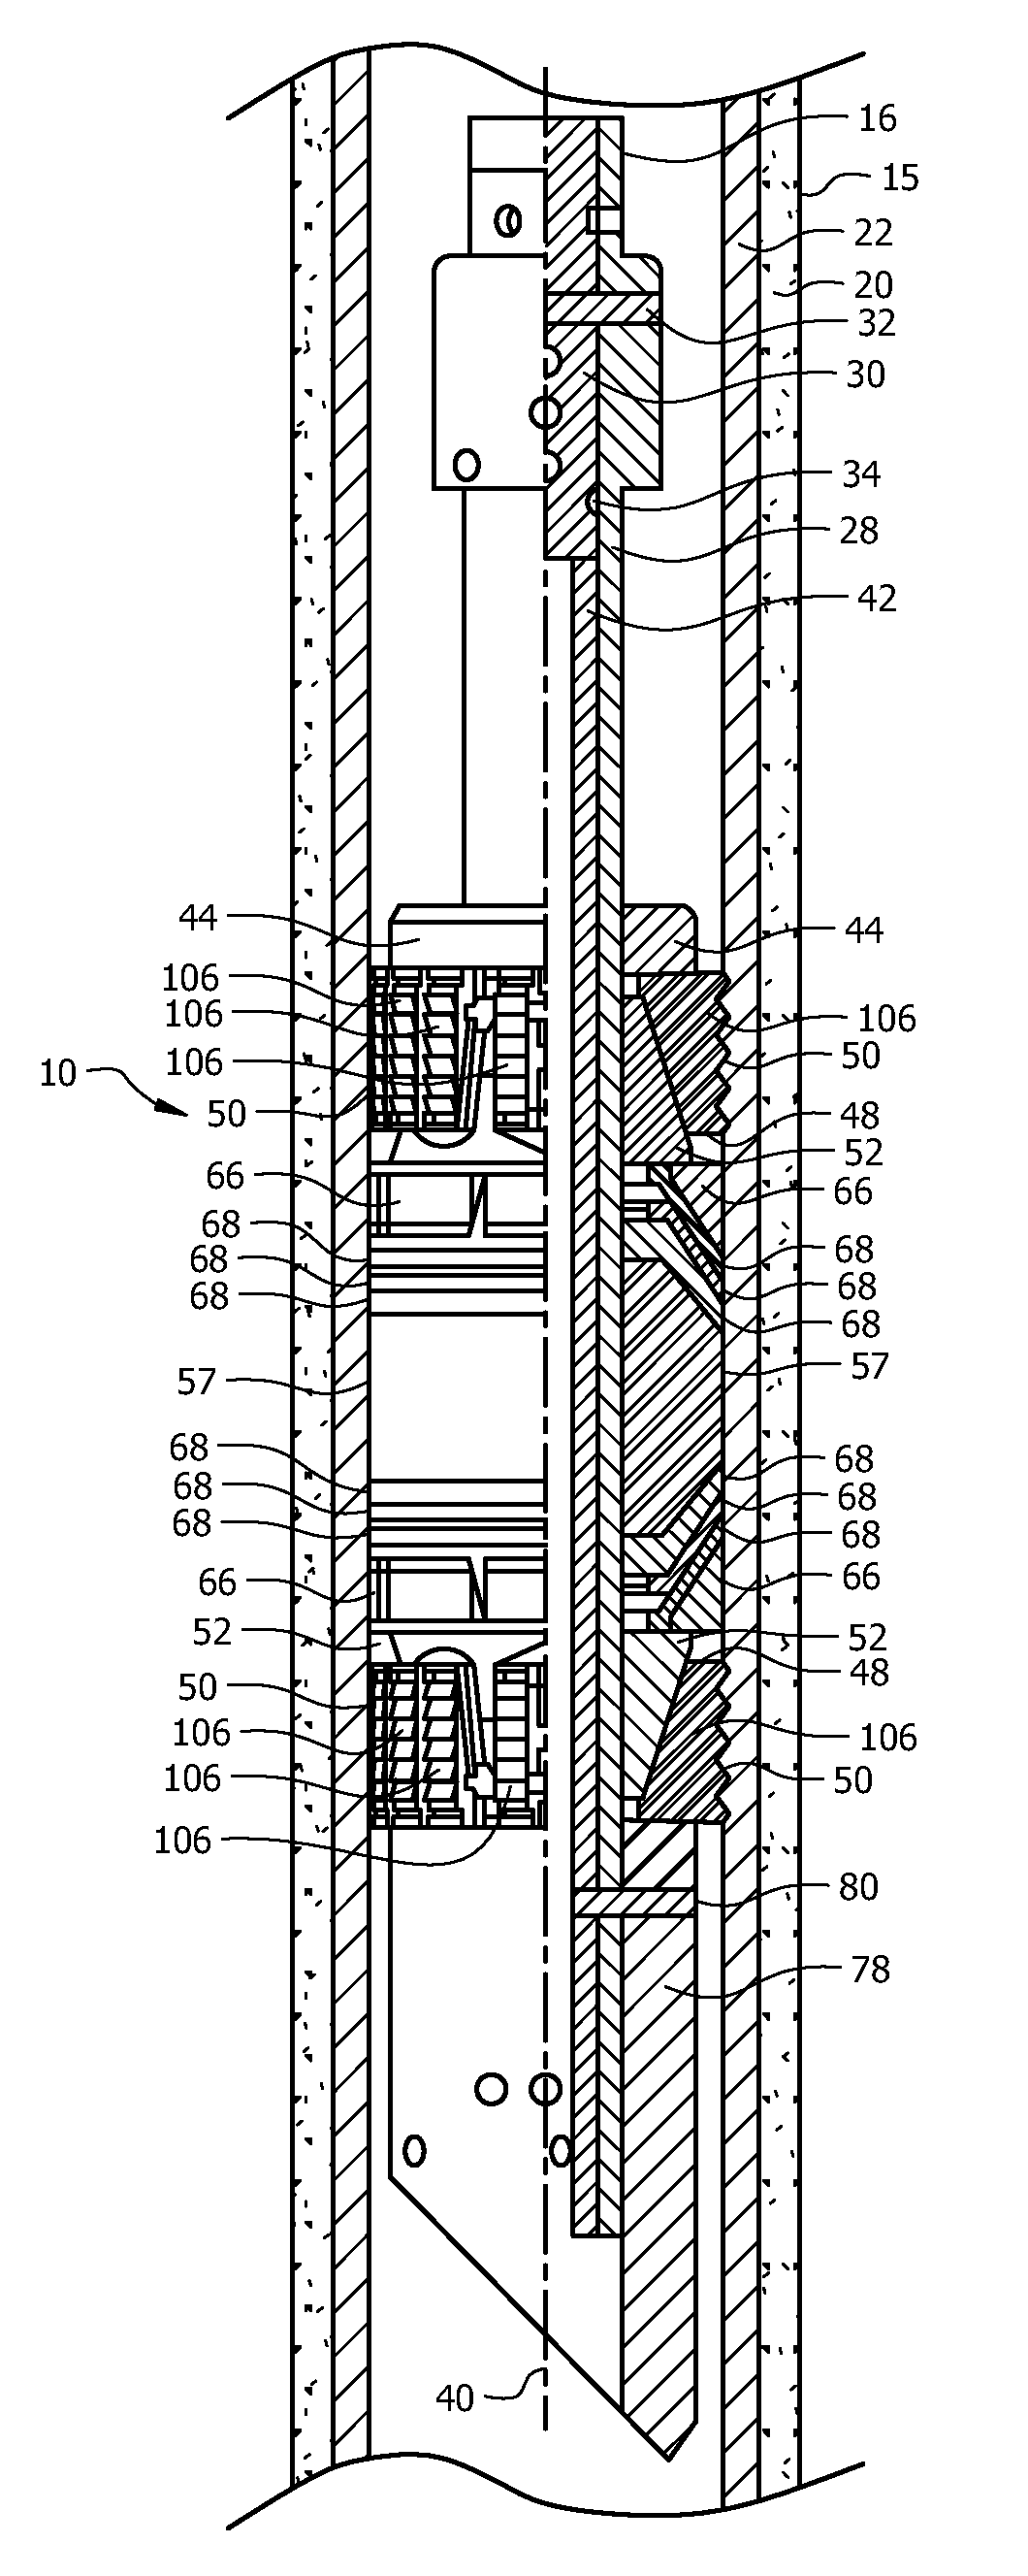 Expansion Device